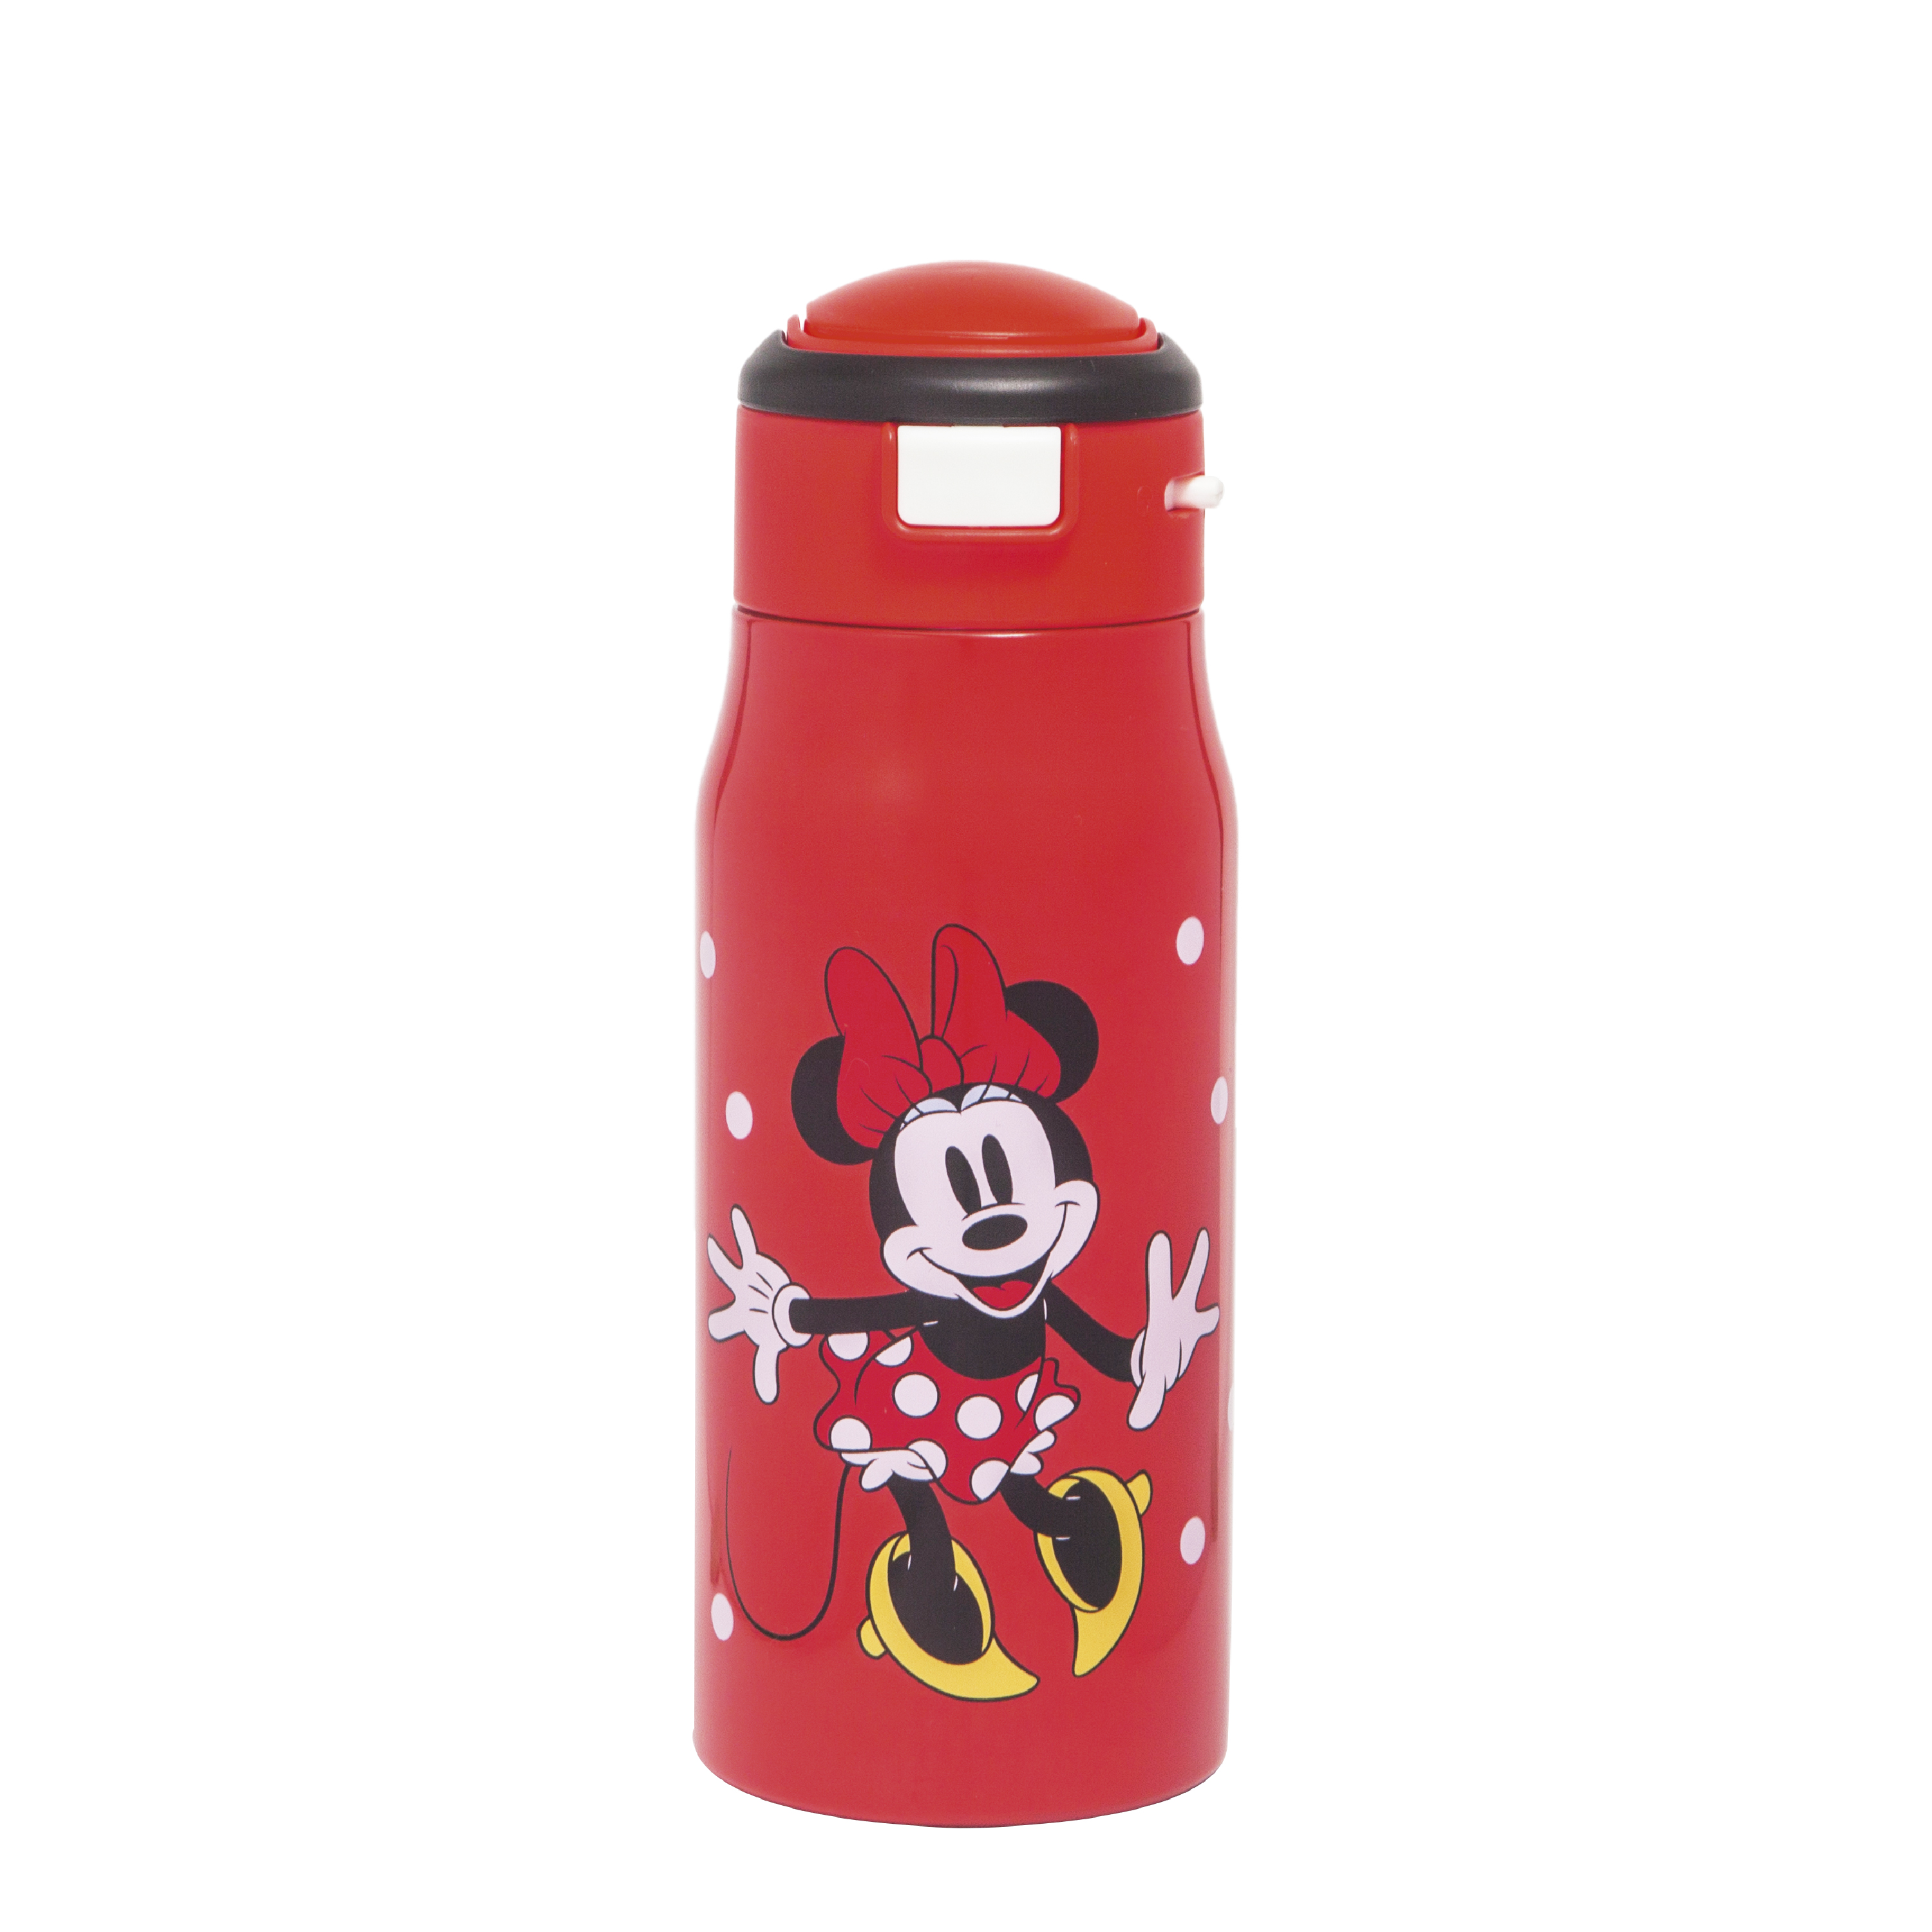 Disney 13.5 ounce Mesa Double Wall Insulated Stainless Steel Water Bottle, Minnie Mouse slideshow image 1